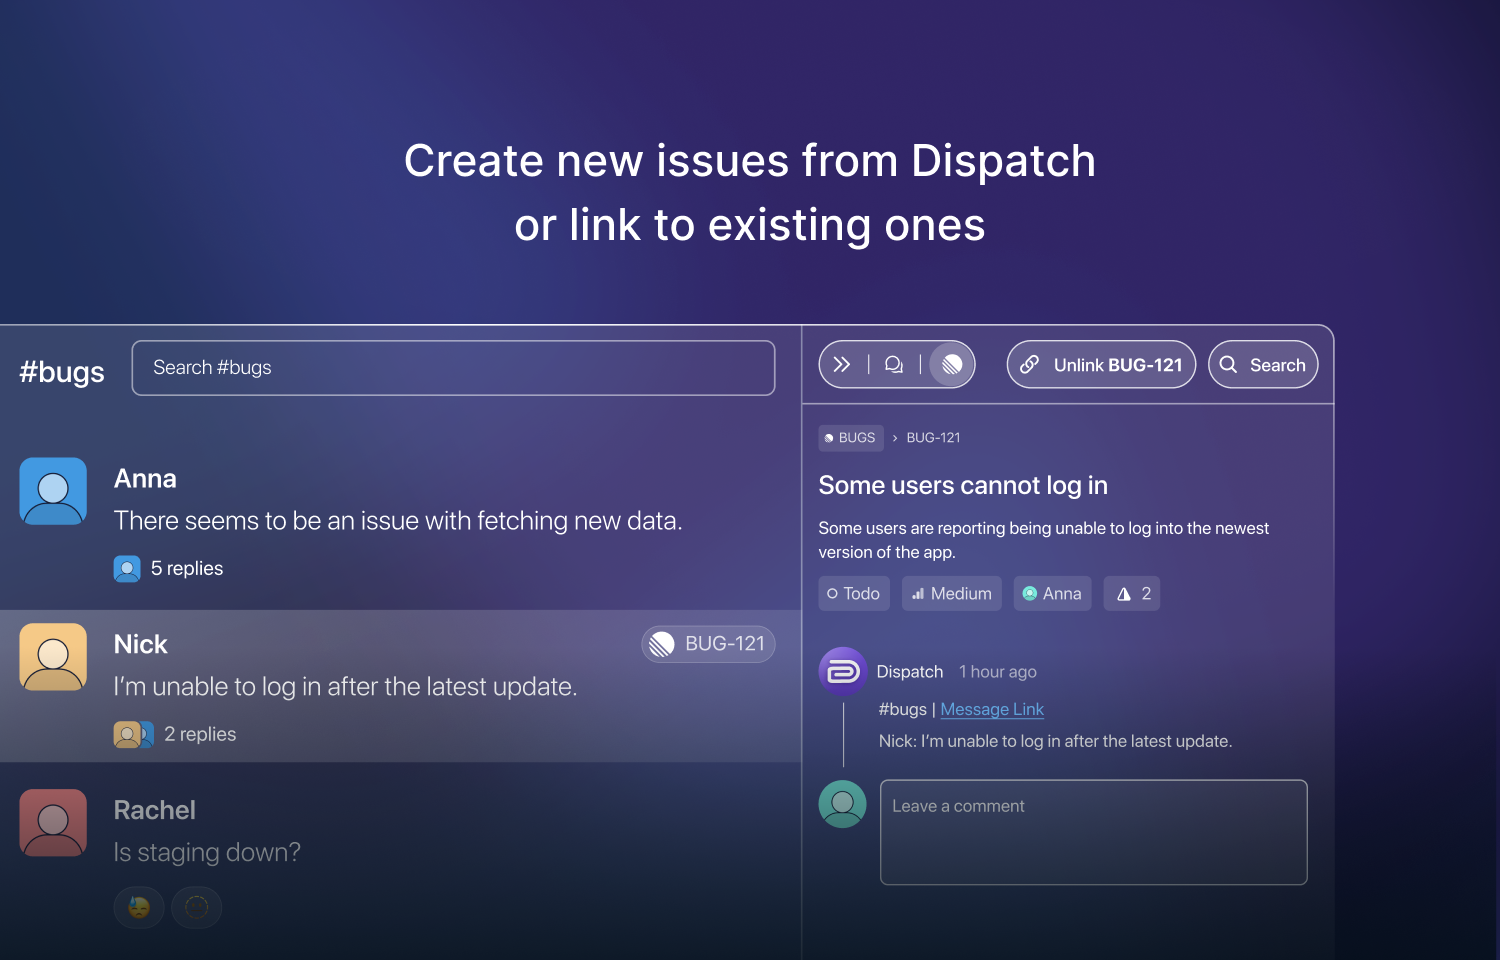 Creating new issues from Dispatch or linking to existing ones